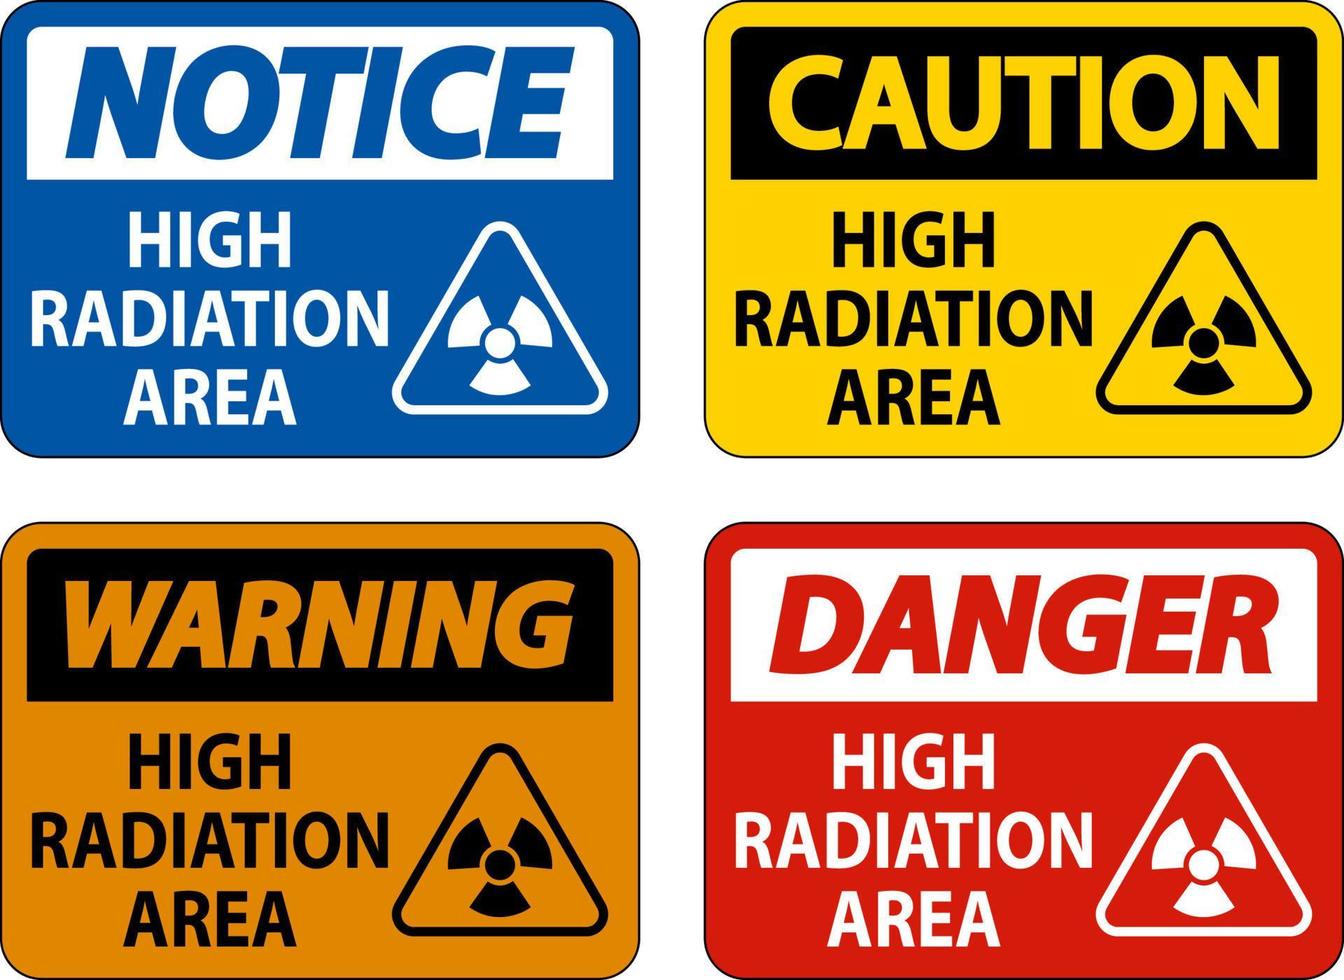 Caution High Radiation Area Sign On White Background vector